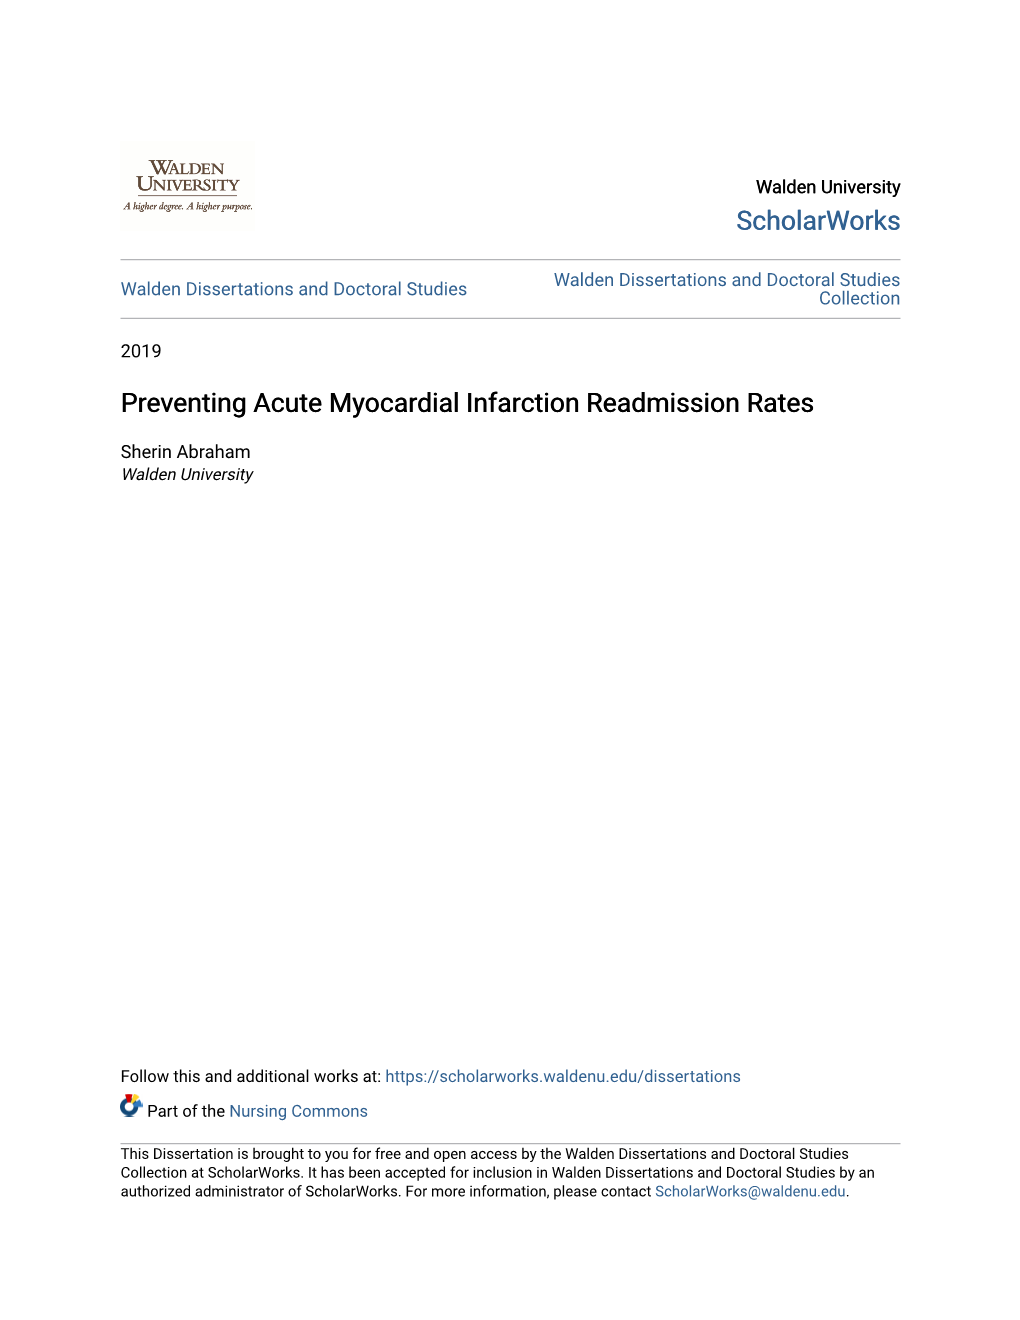 Preventing Acute Myocardial Infarction Readmission Rates